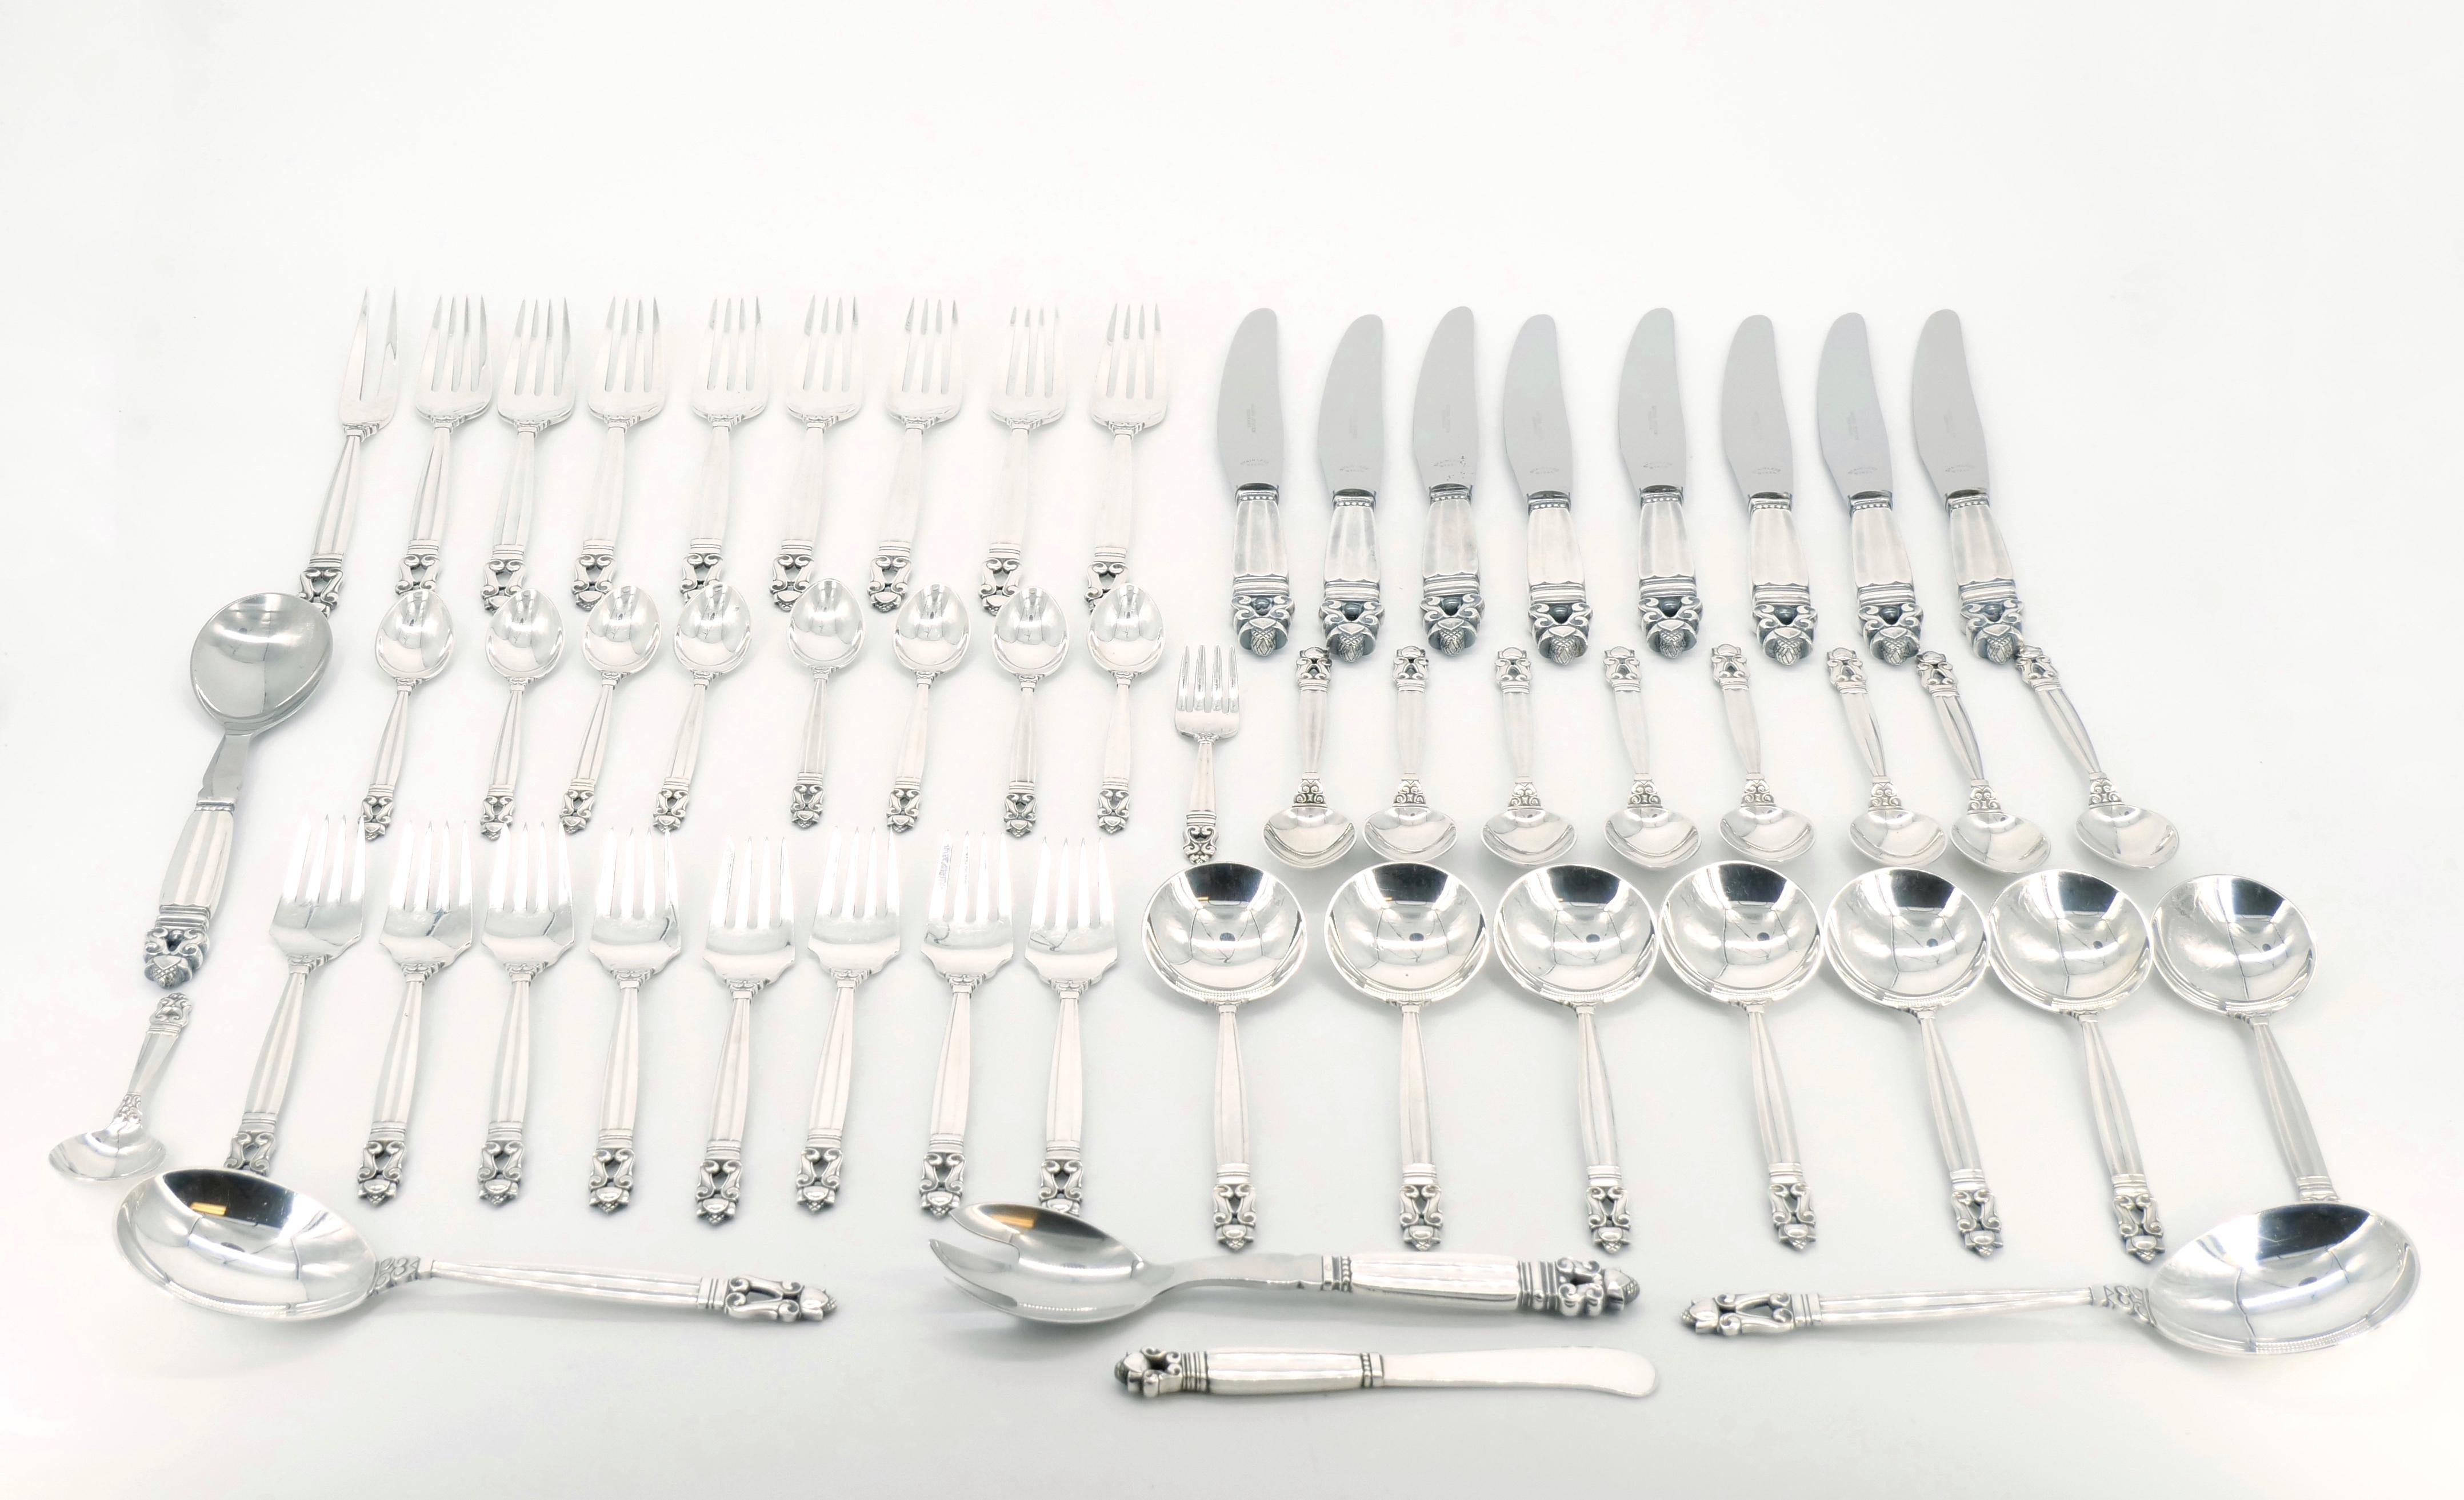 Discover timeless sophistication with this exquisite sterling silver flatware service designed in the iconic Acorn pattern by Georg Jensen. Produced circa 1917, this set boasts not only a rich history but also impeccable craftsmanship and enduring